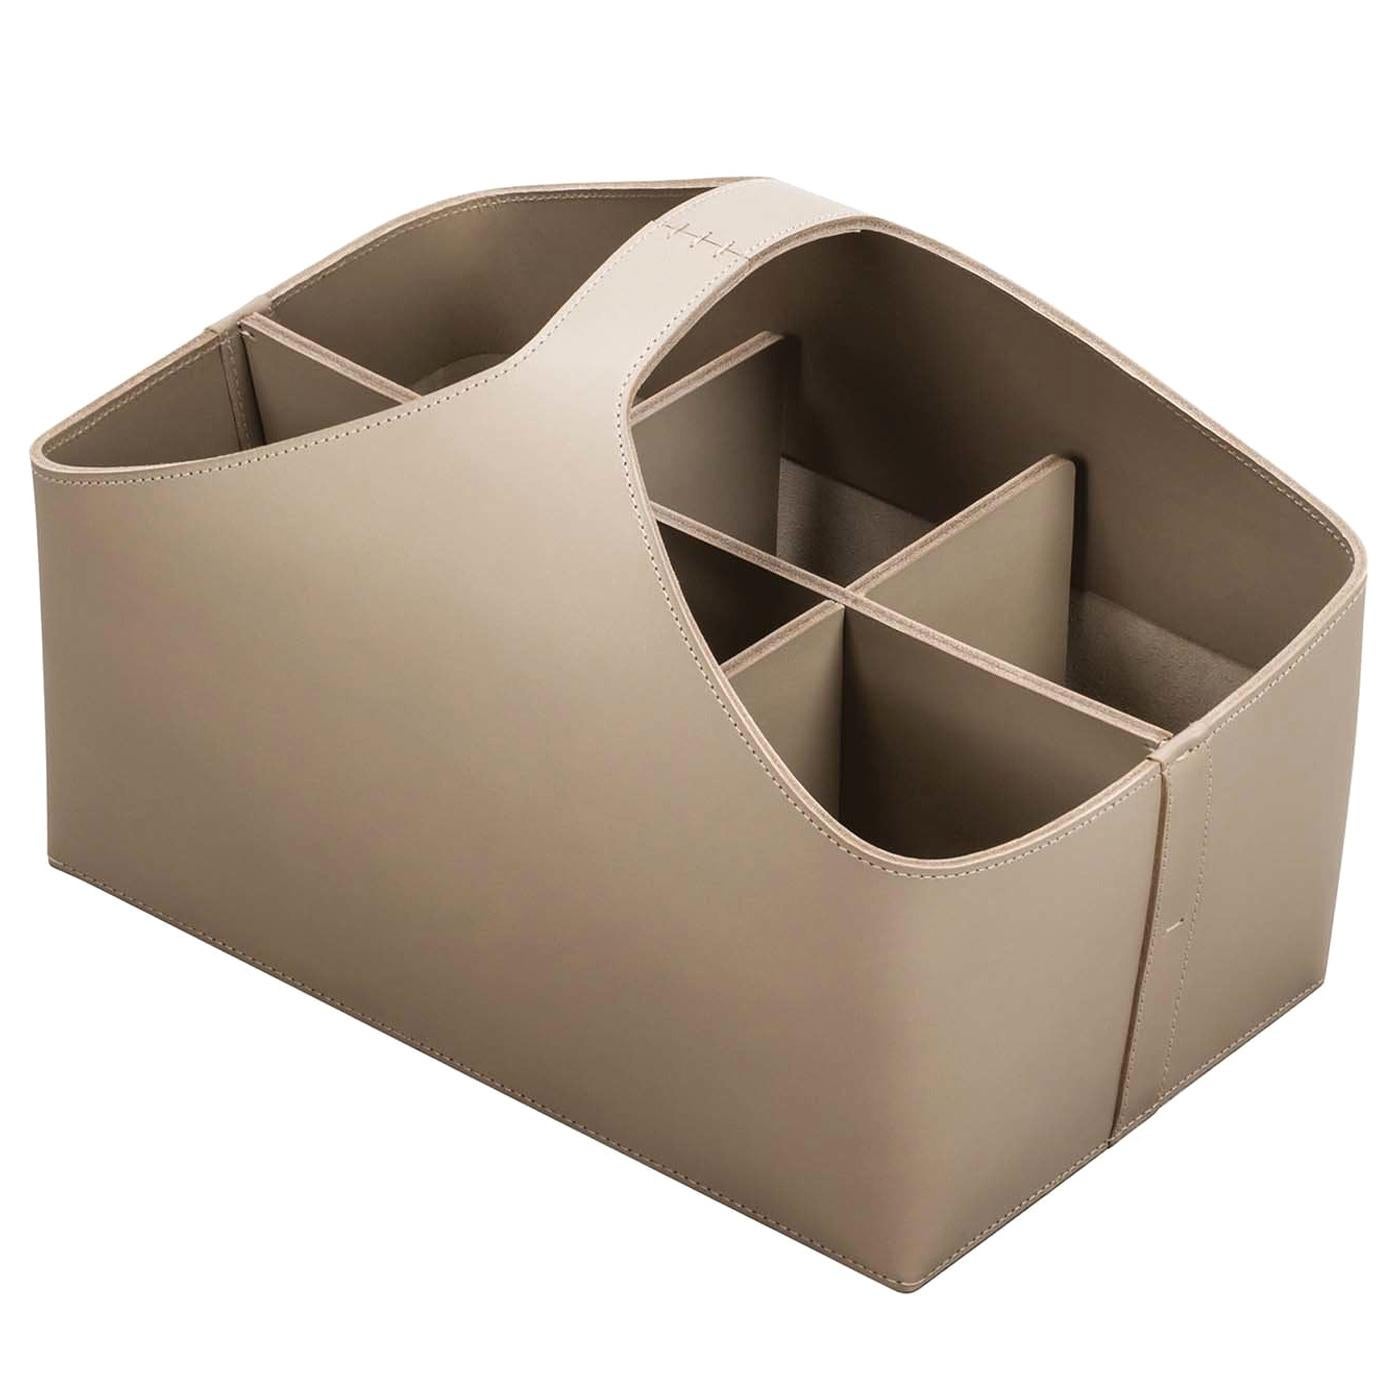 Arco Medium Caddy Basket with 6 Dividers in Sand Leather